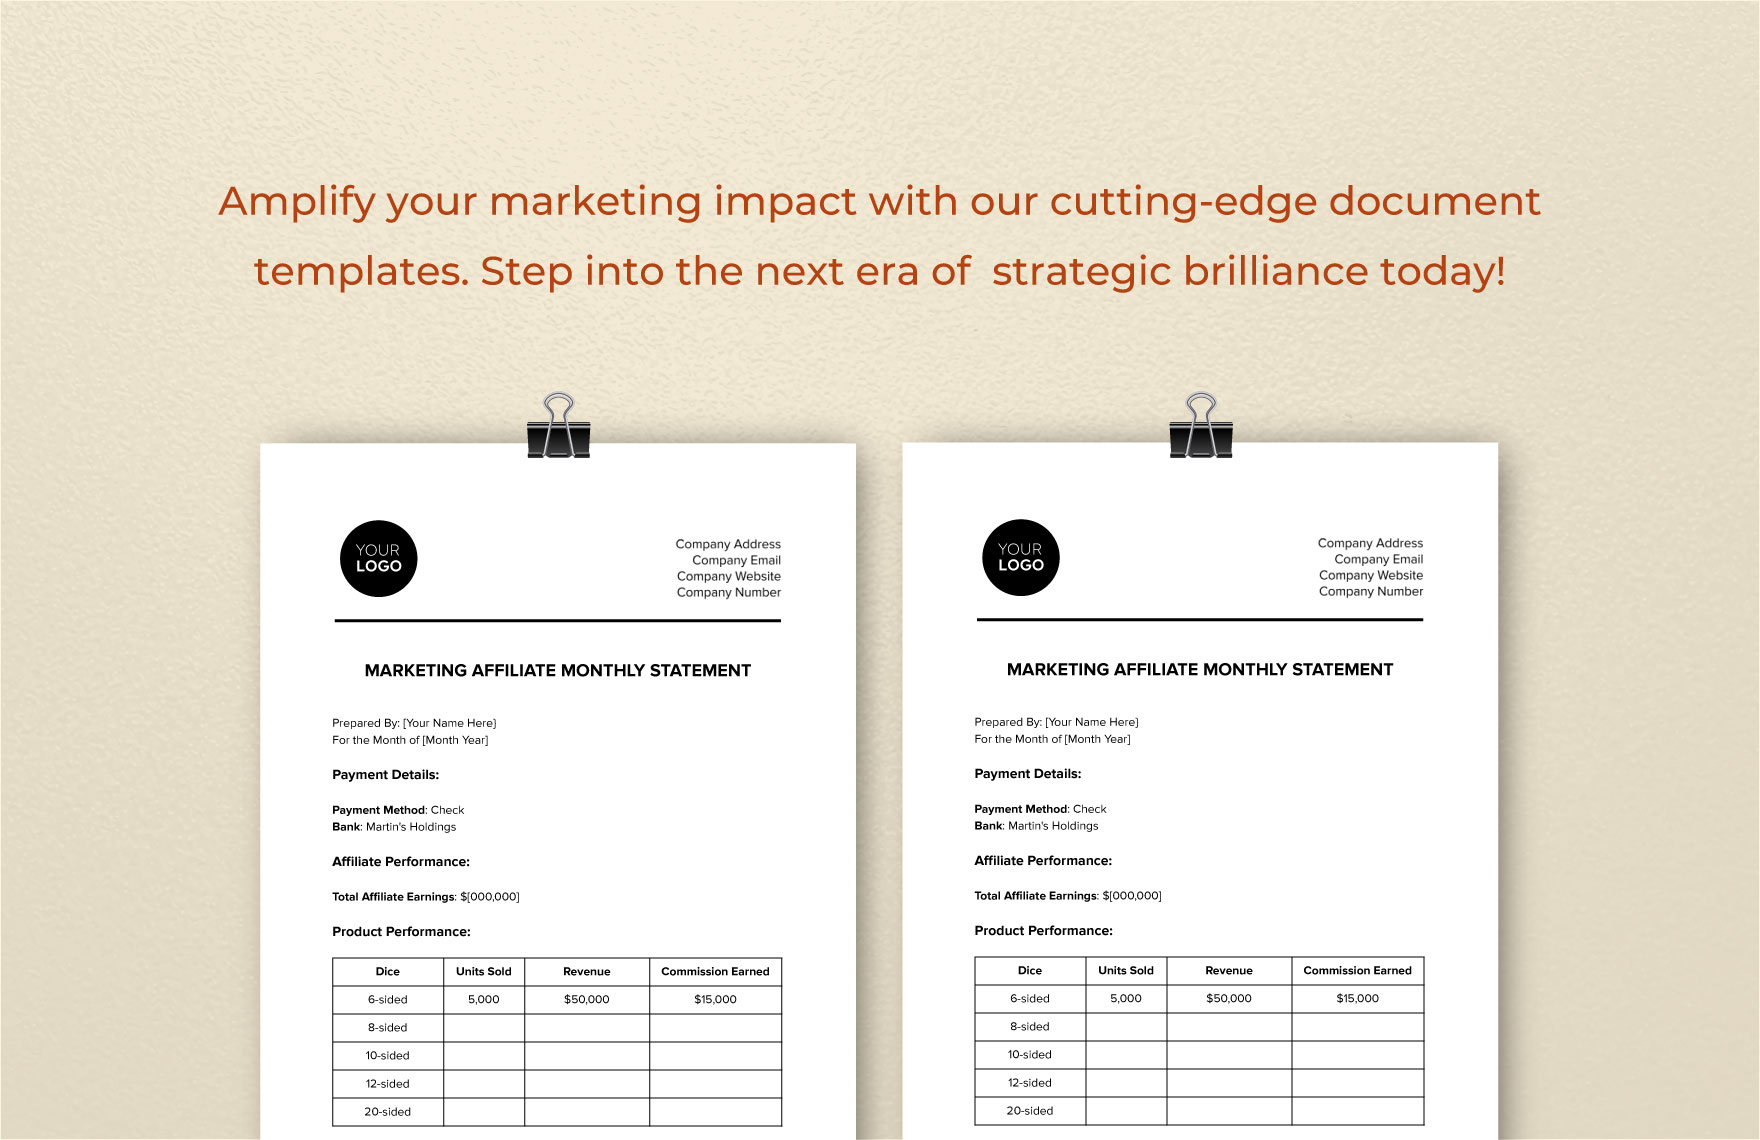 Marketing Affiliate Monthly Statement Template